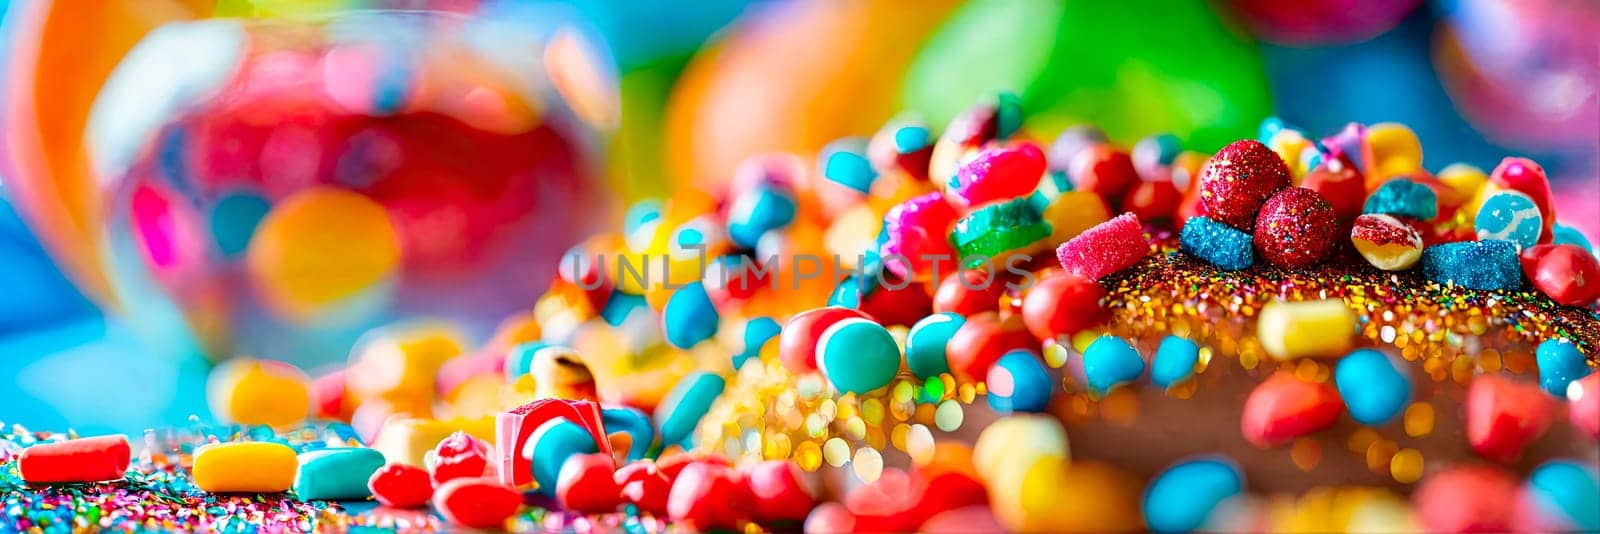 candy sweets and birthday cake. selective focus. happy.